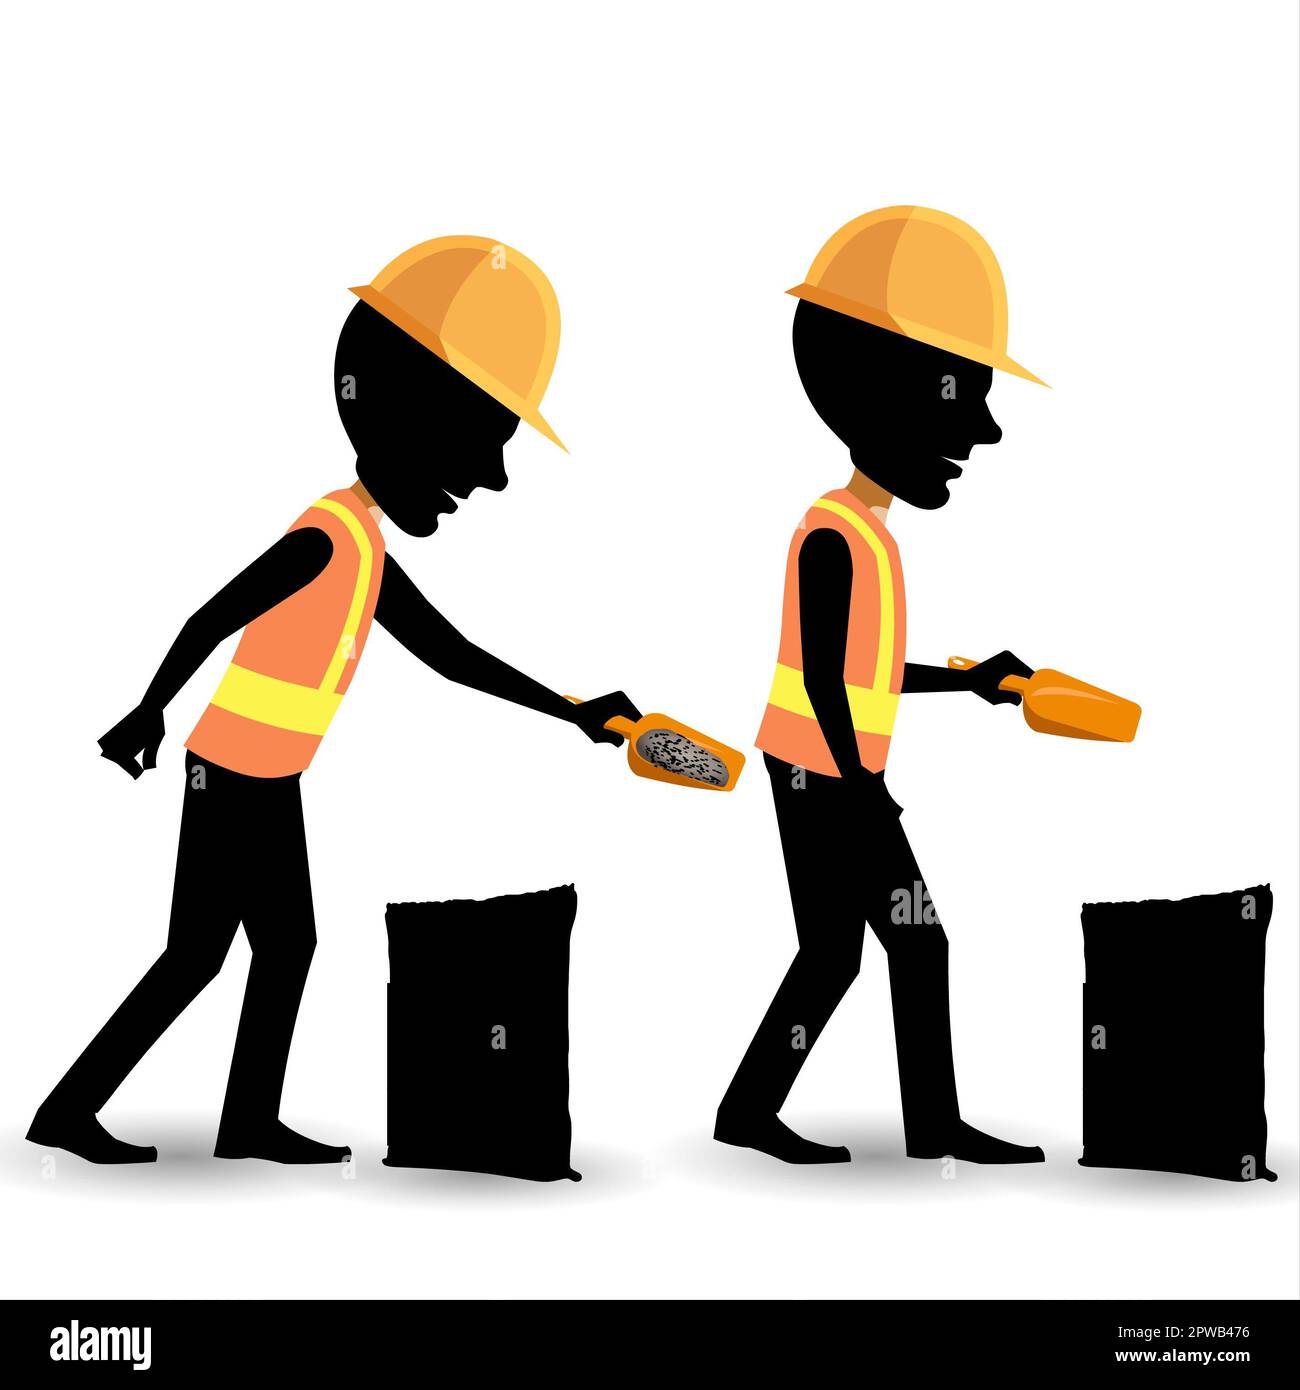 Construction workers silhouettes Stock Photo